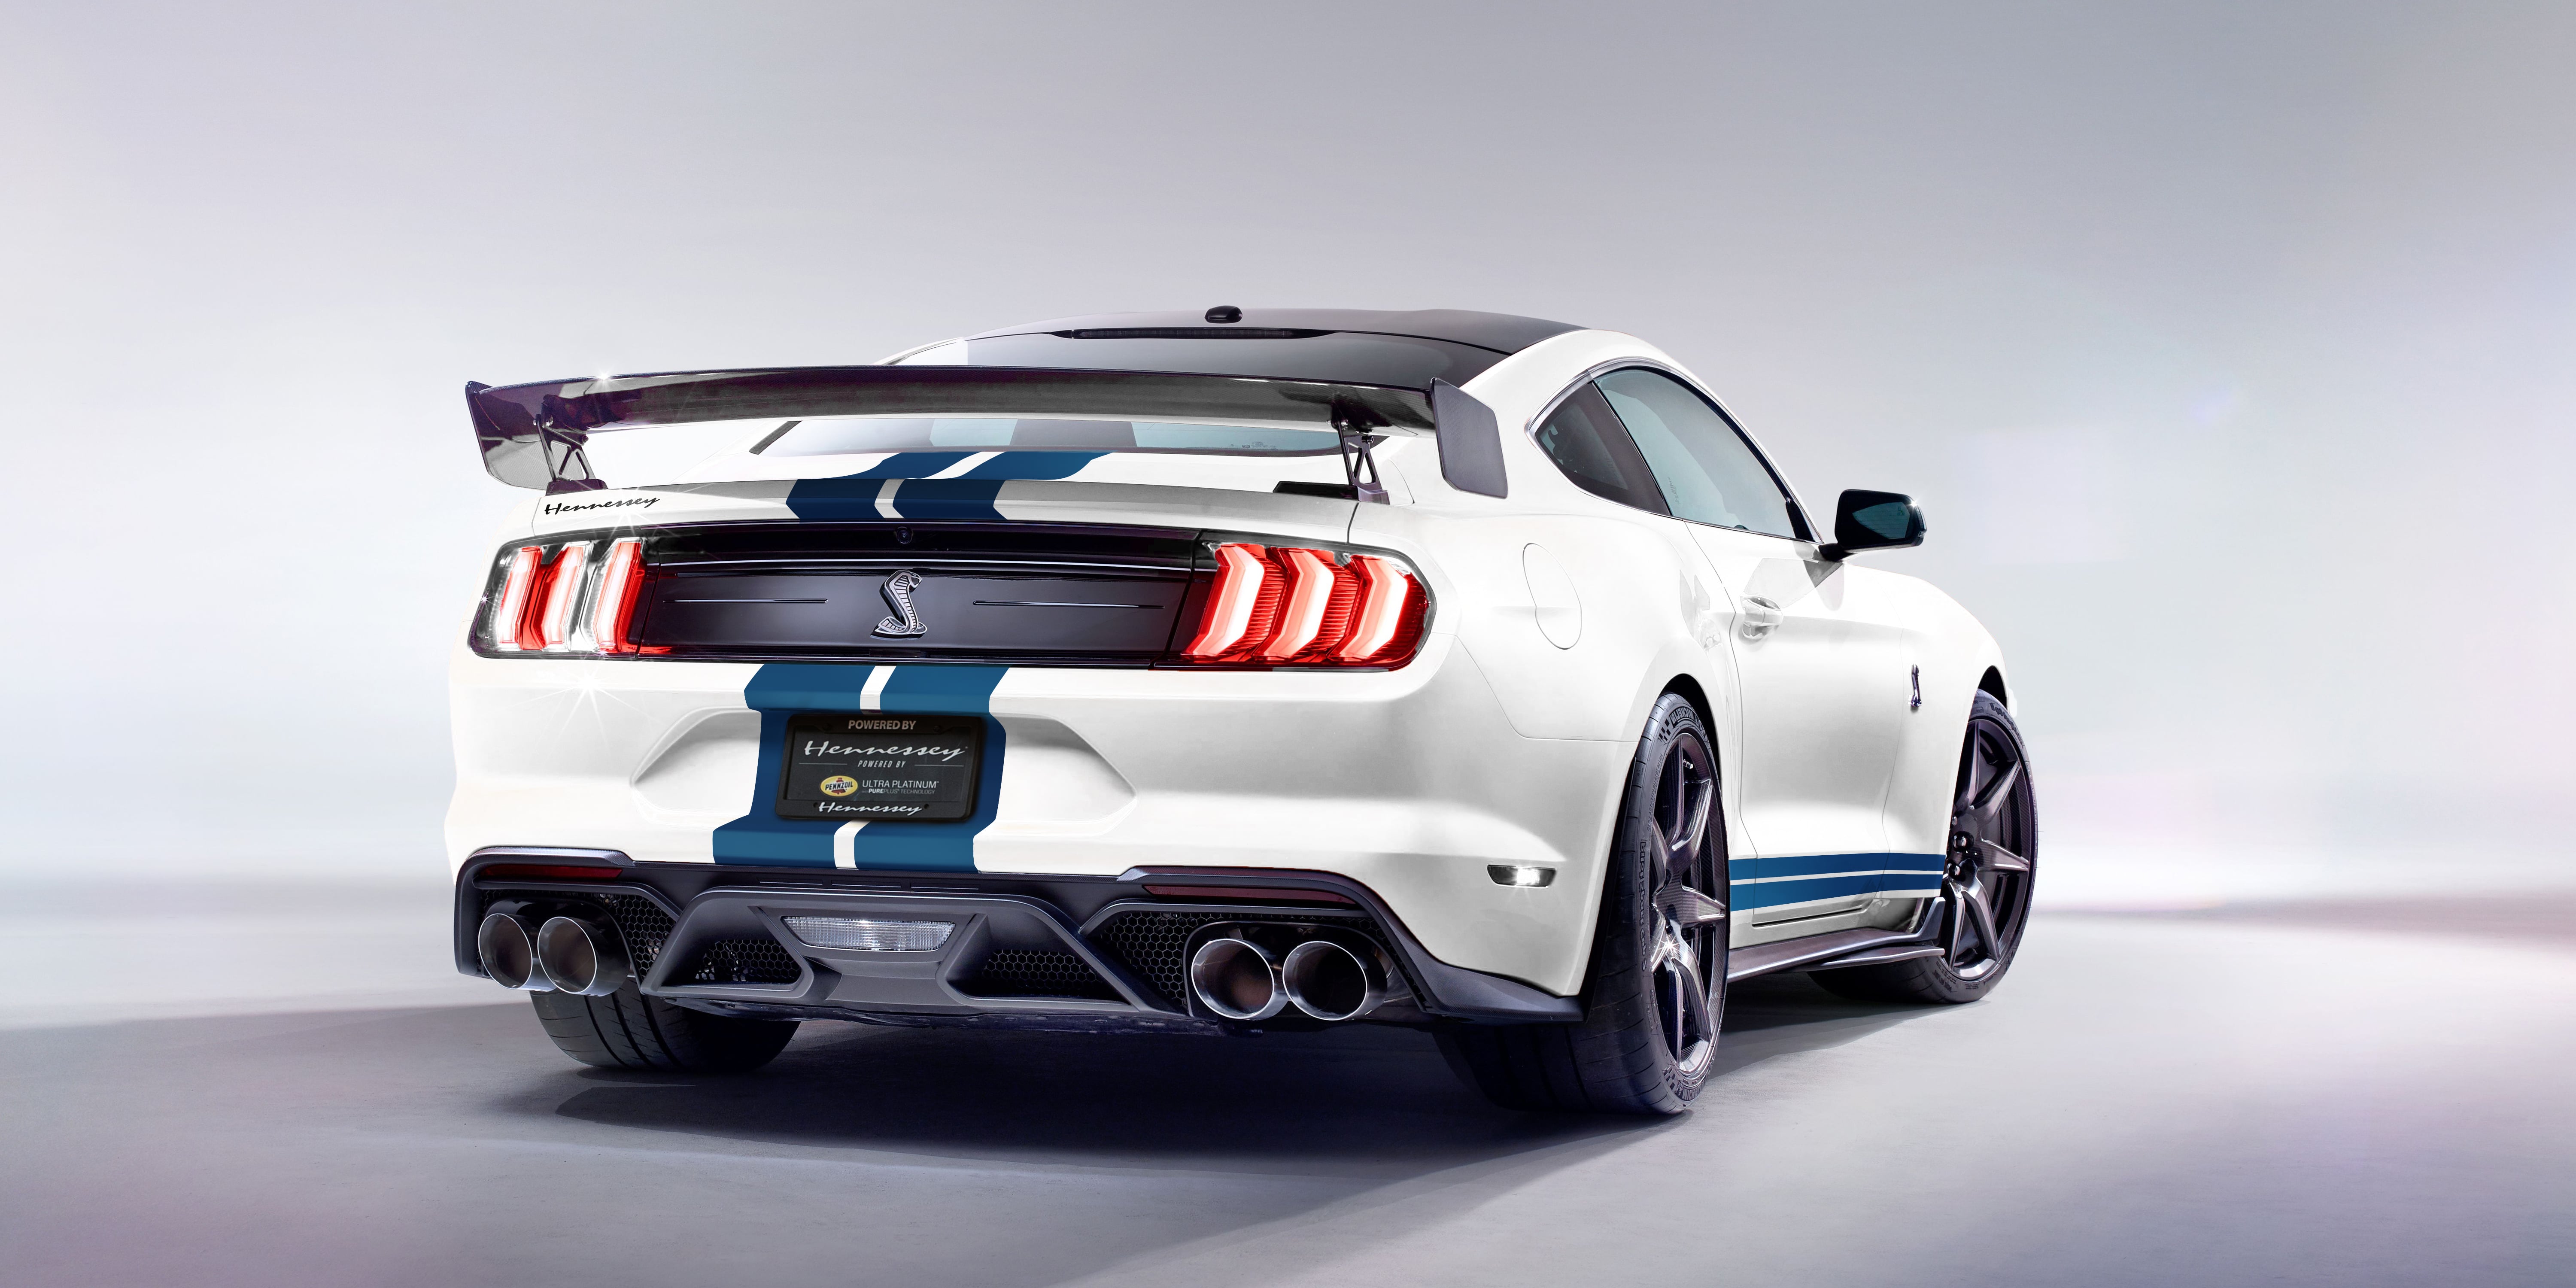 Wallpapers Hennessey cars Mustang on the desktop